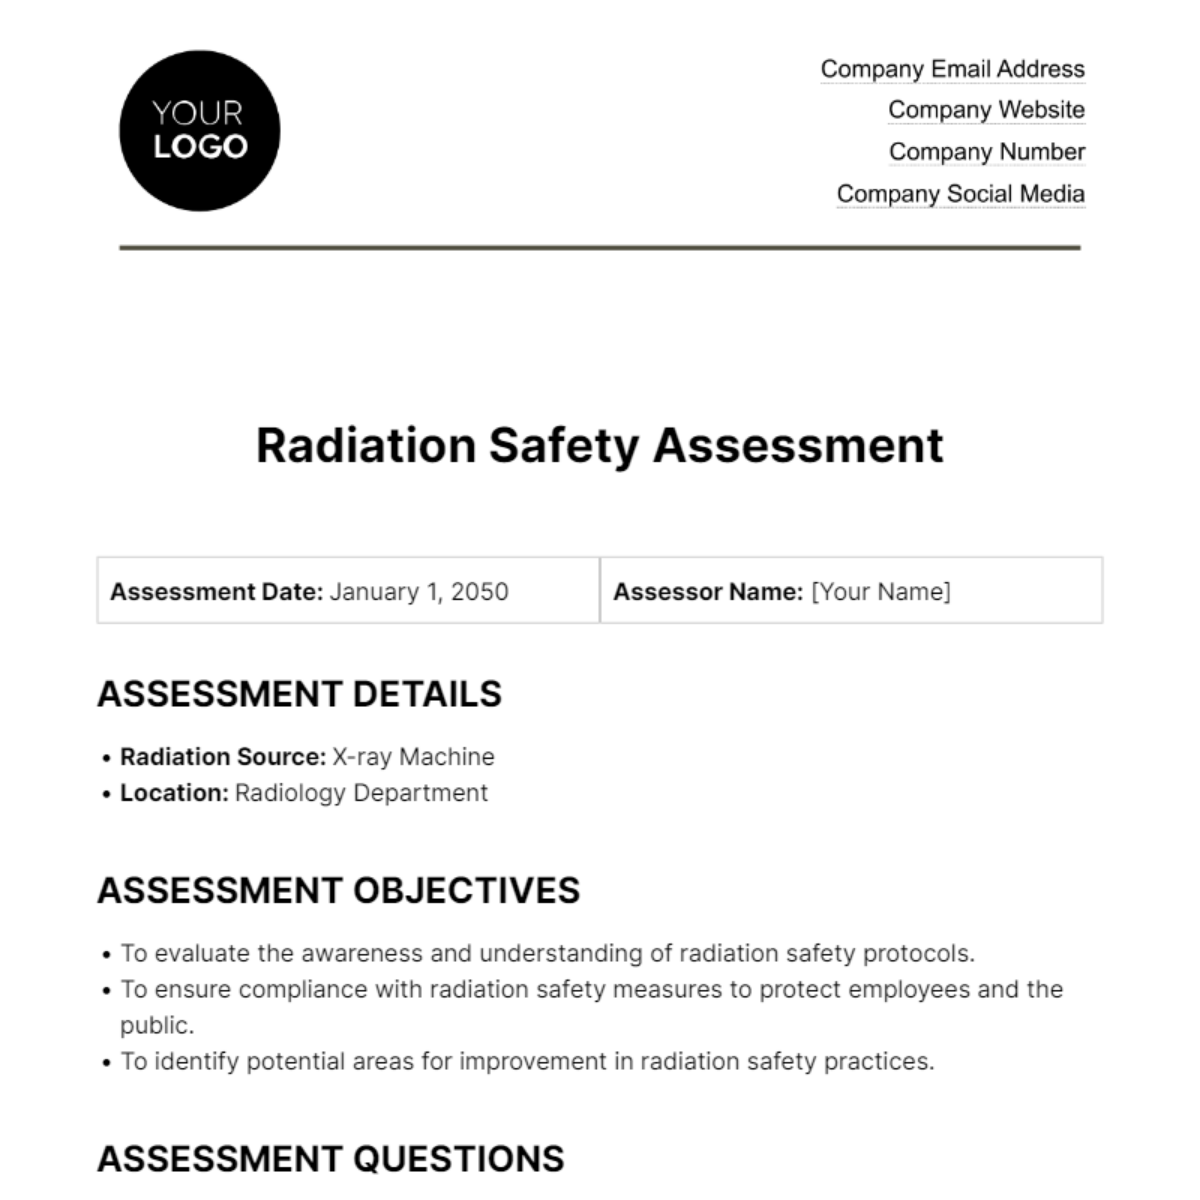 Radiation Safety Assessment HR Template